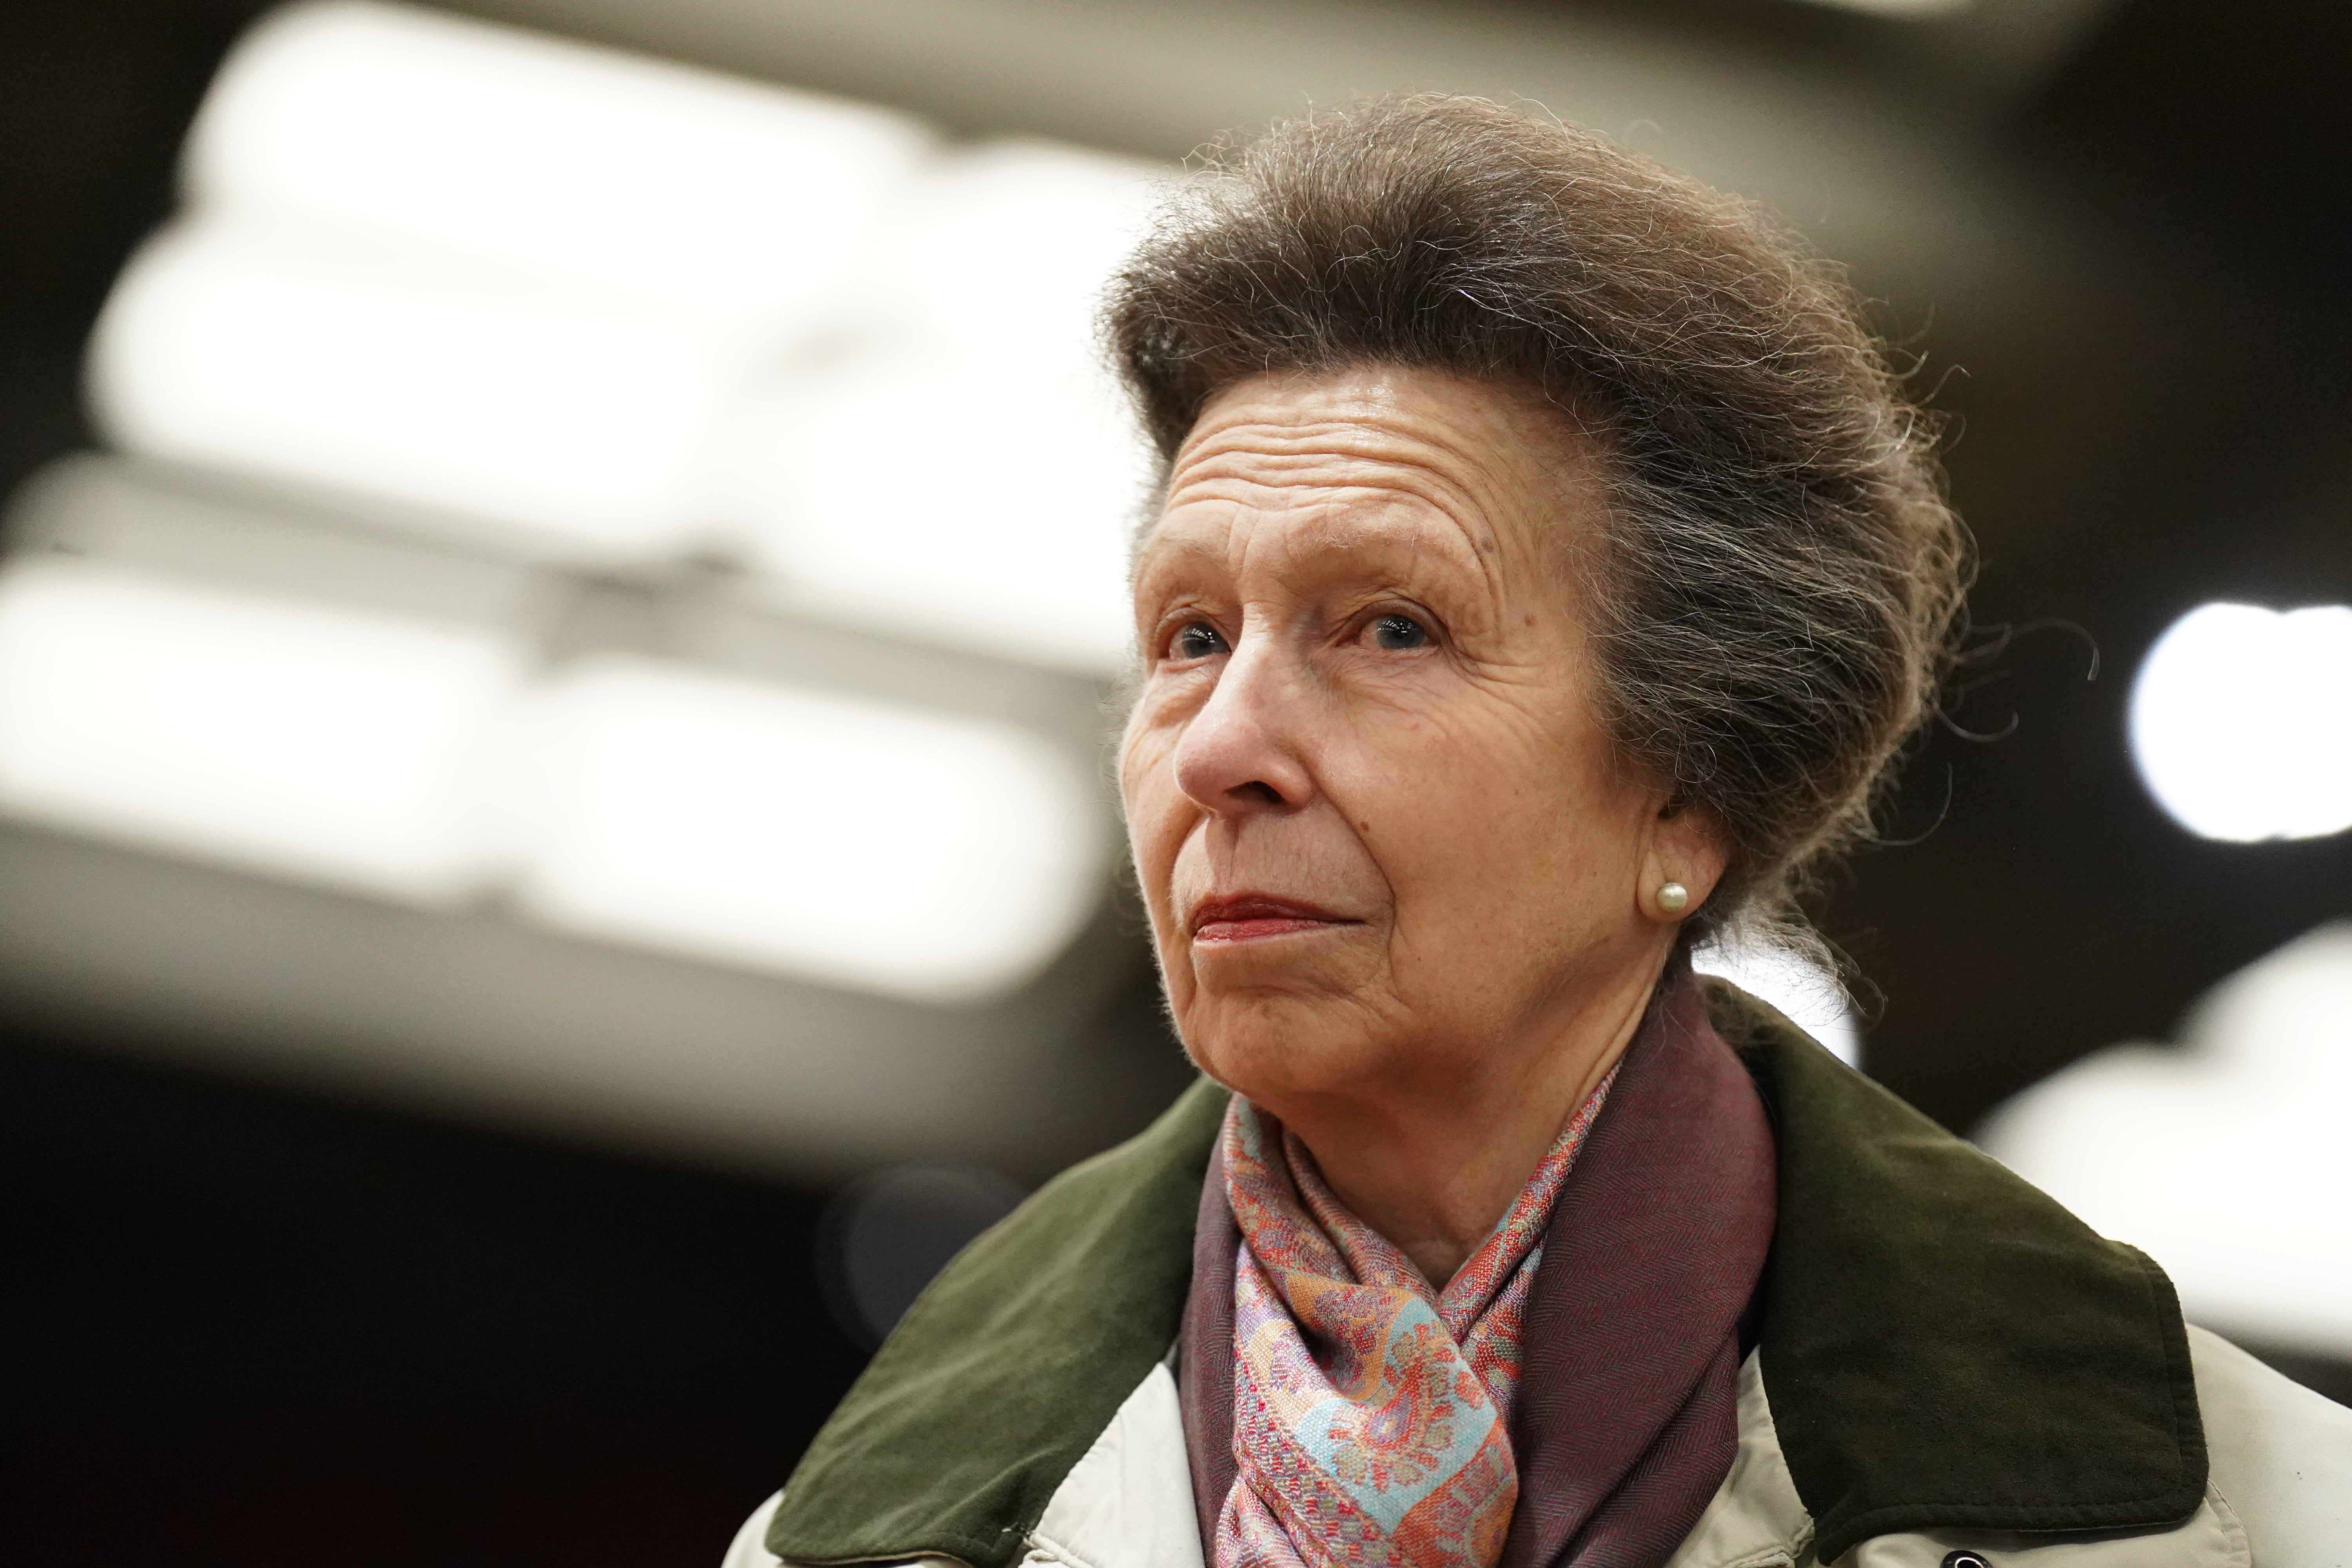 The incident took place on Sunday evening as the Princess Royal walked around her estate.